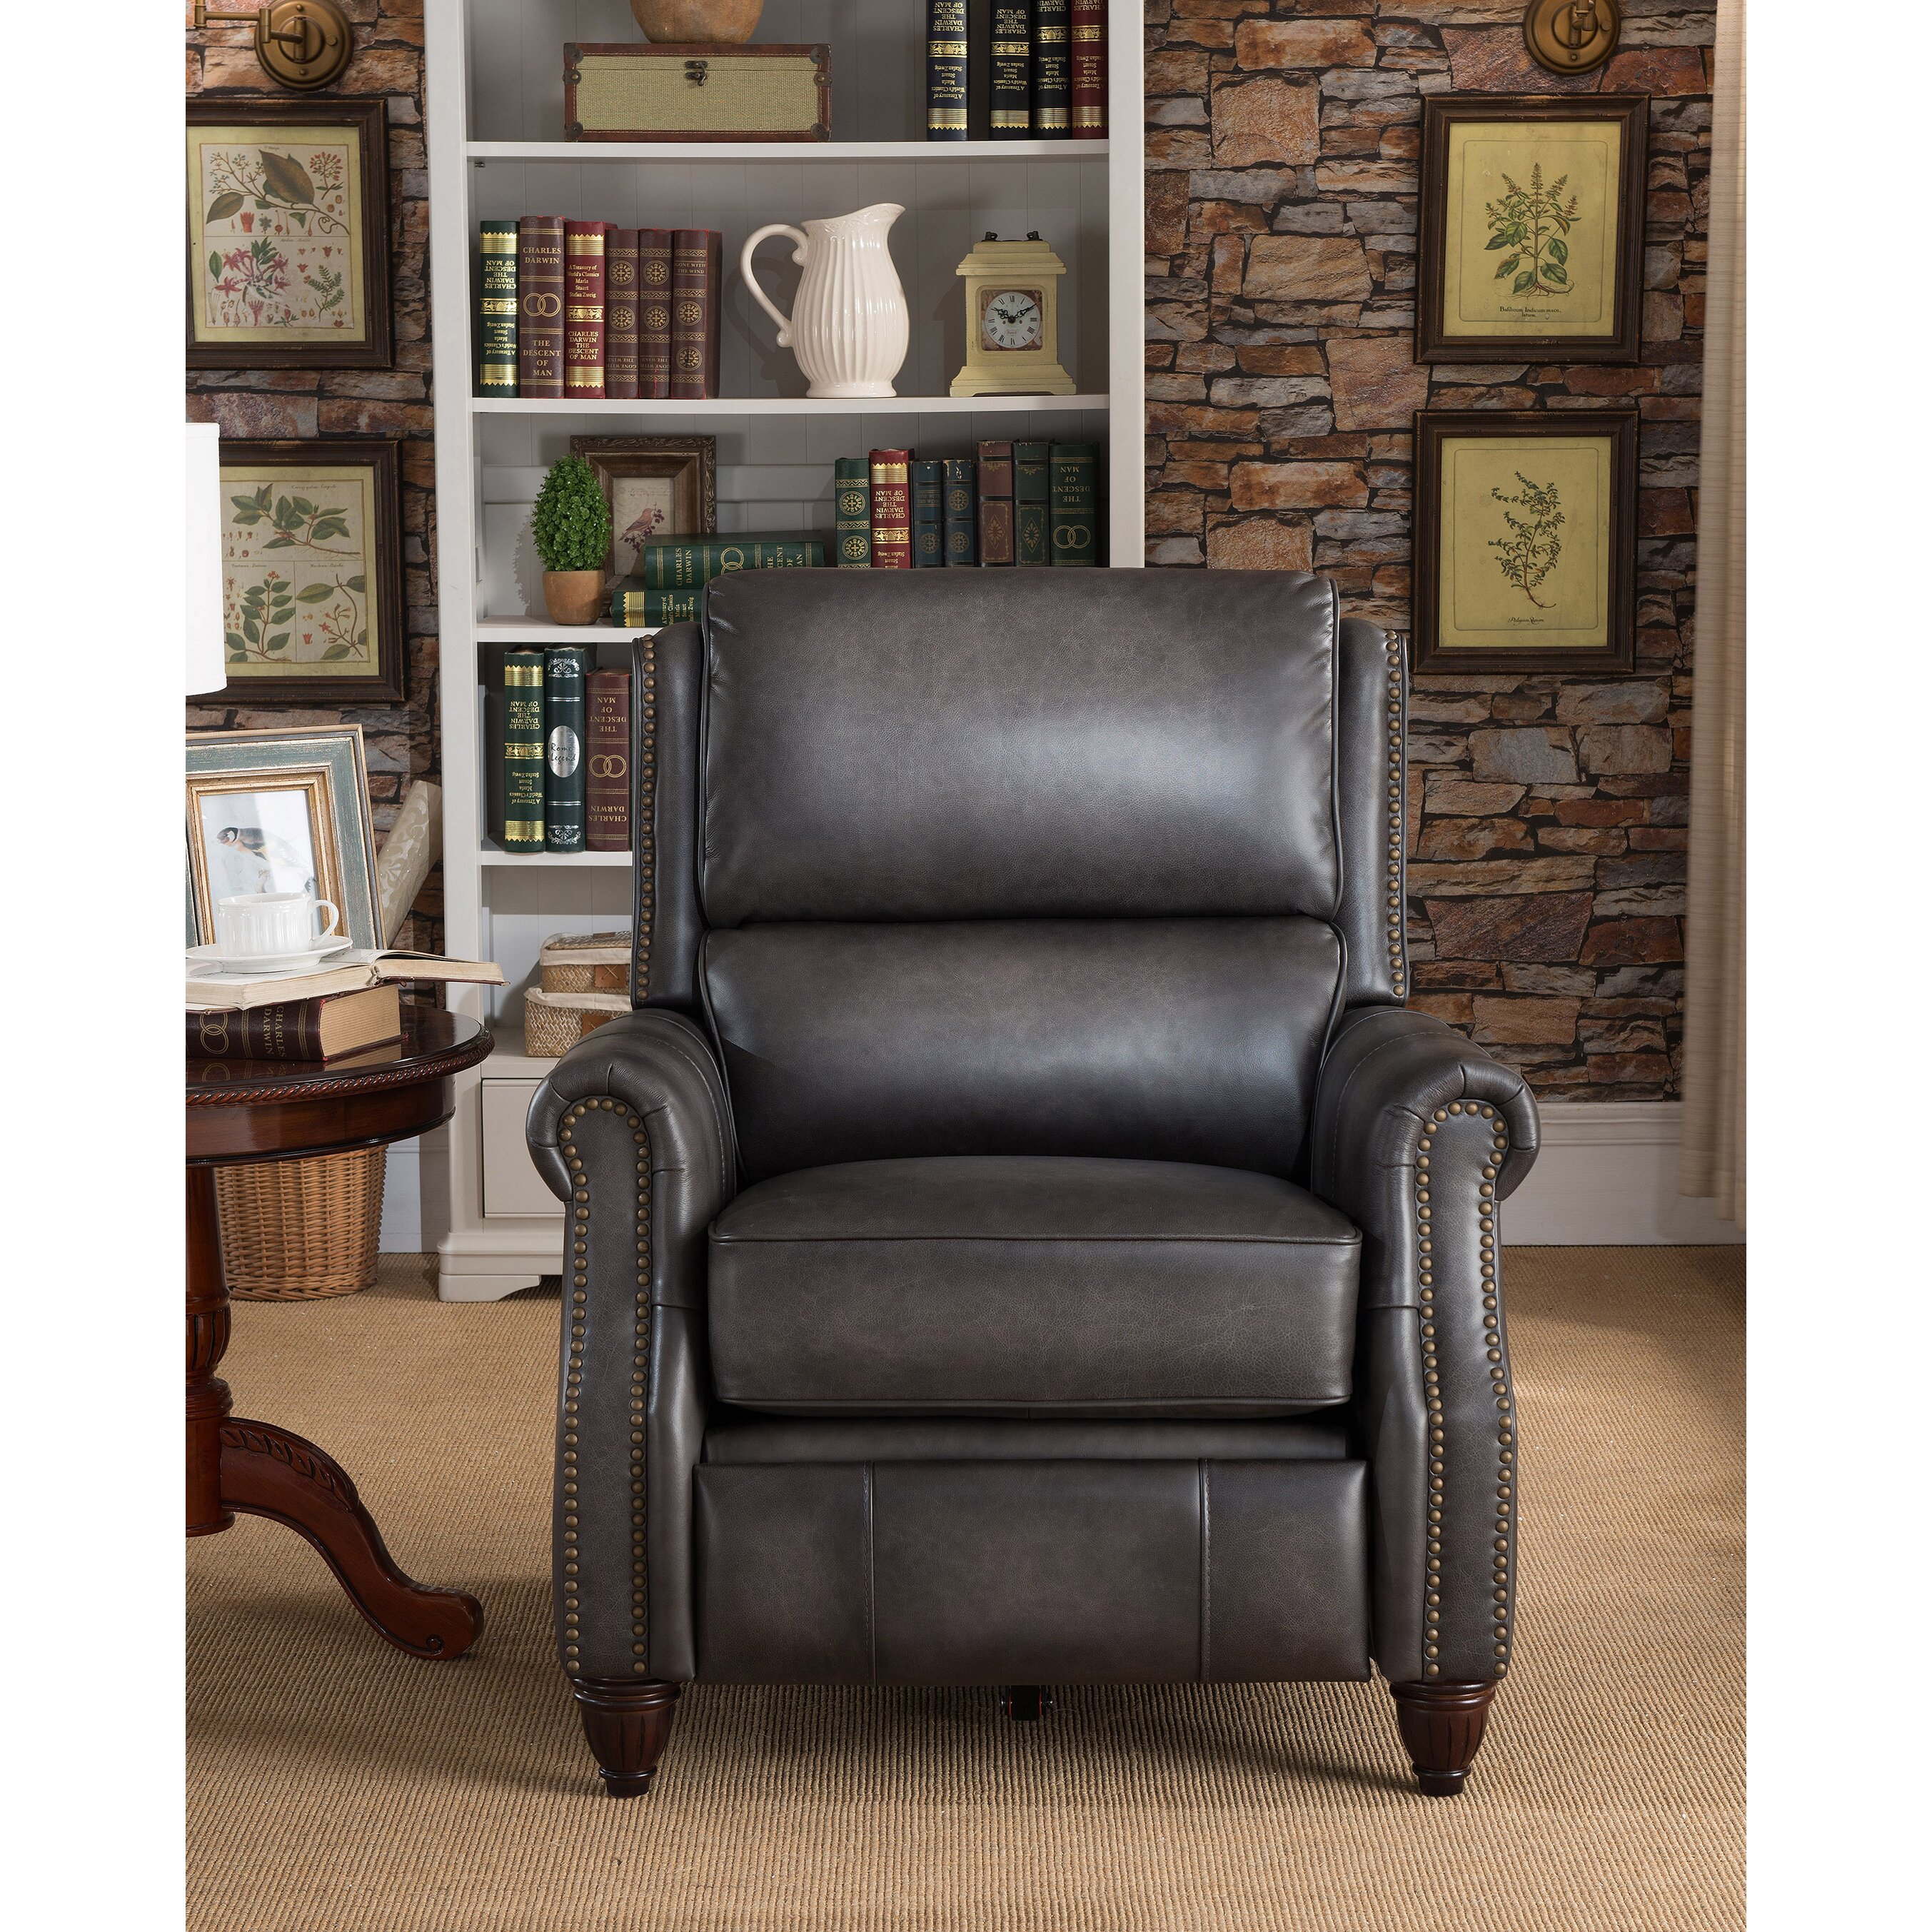 Amax Emery Leather Power Recliner with USB Port | Wayfair - Amax Emery Leather Power Recliner with USB Port